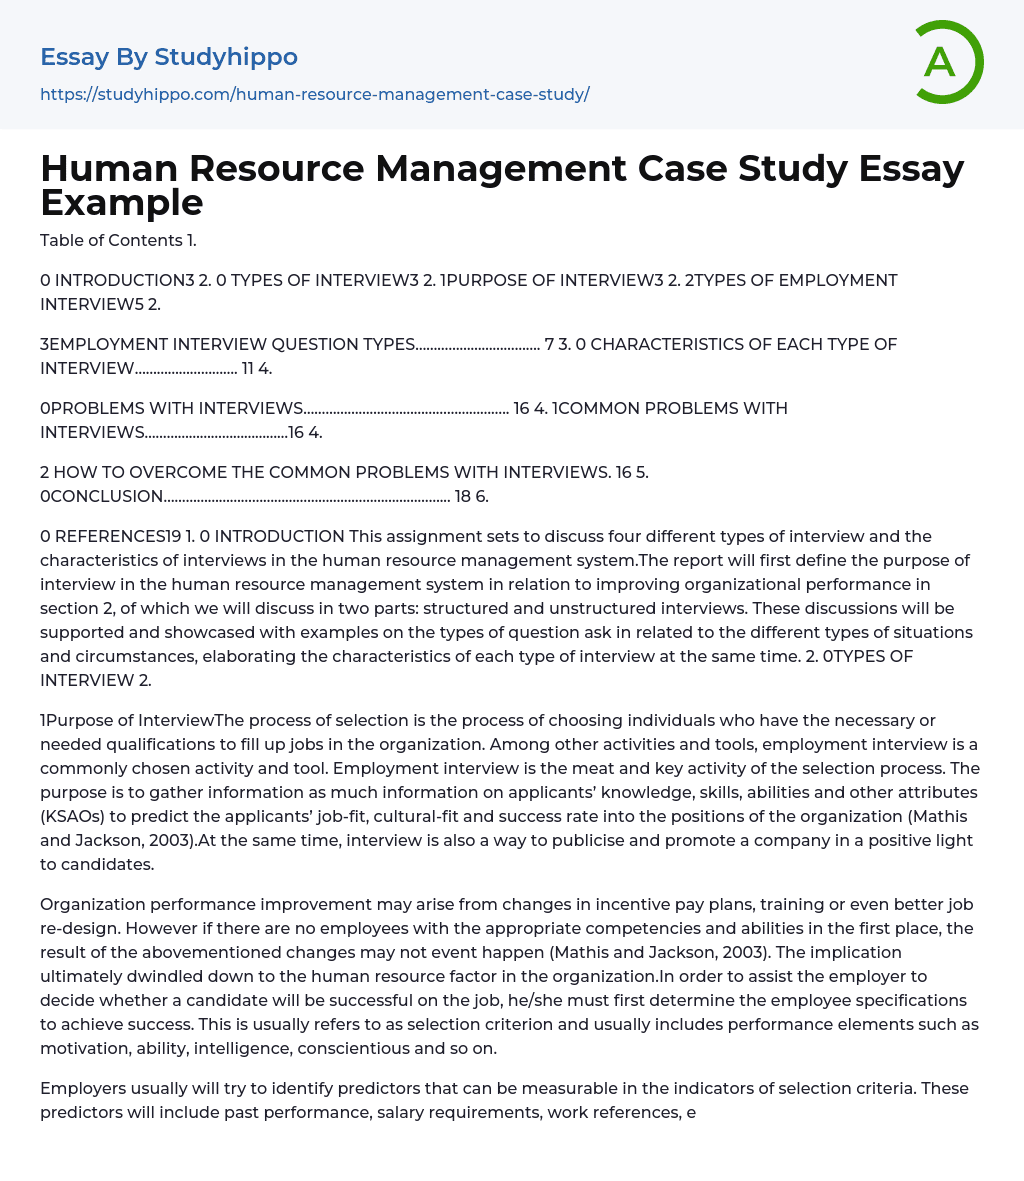 Human Resource Management Case Study Essay Example